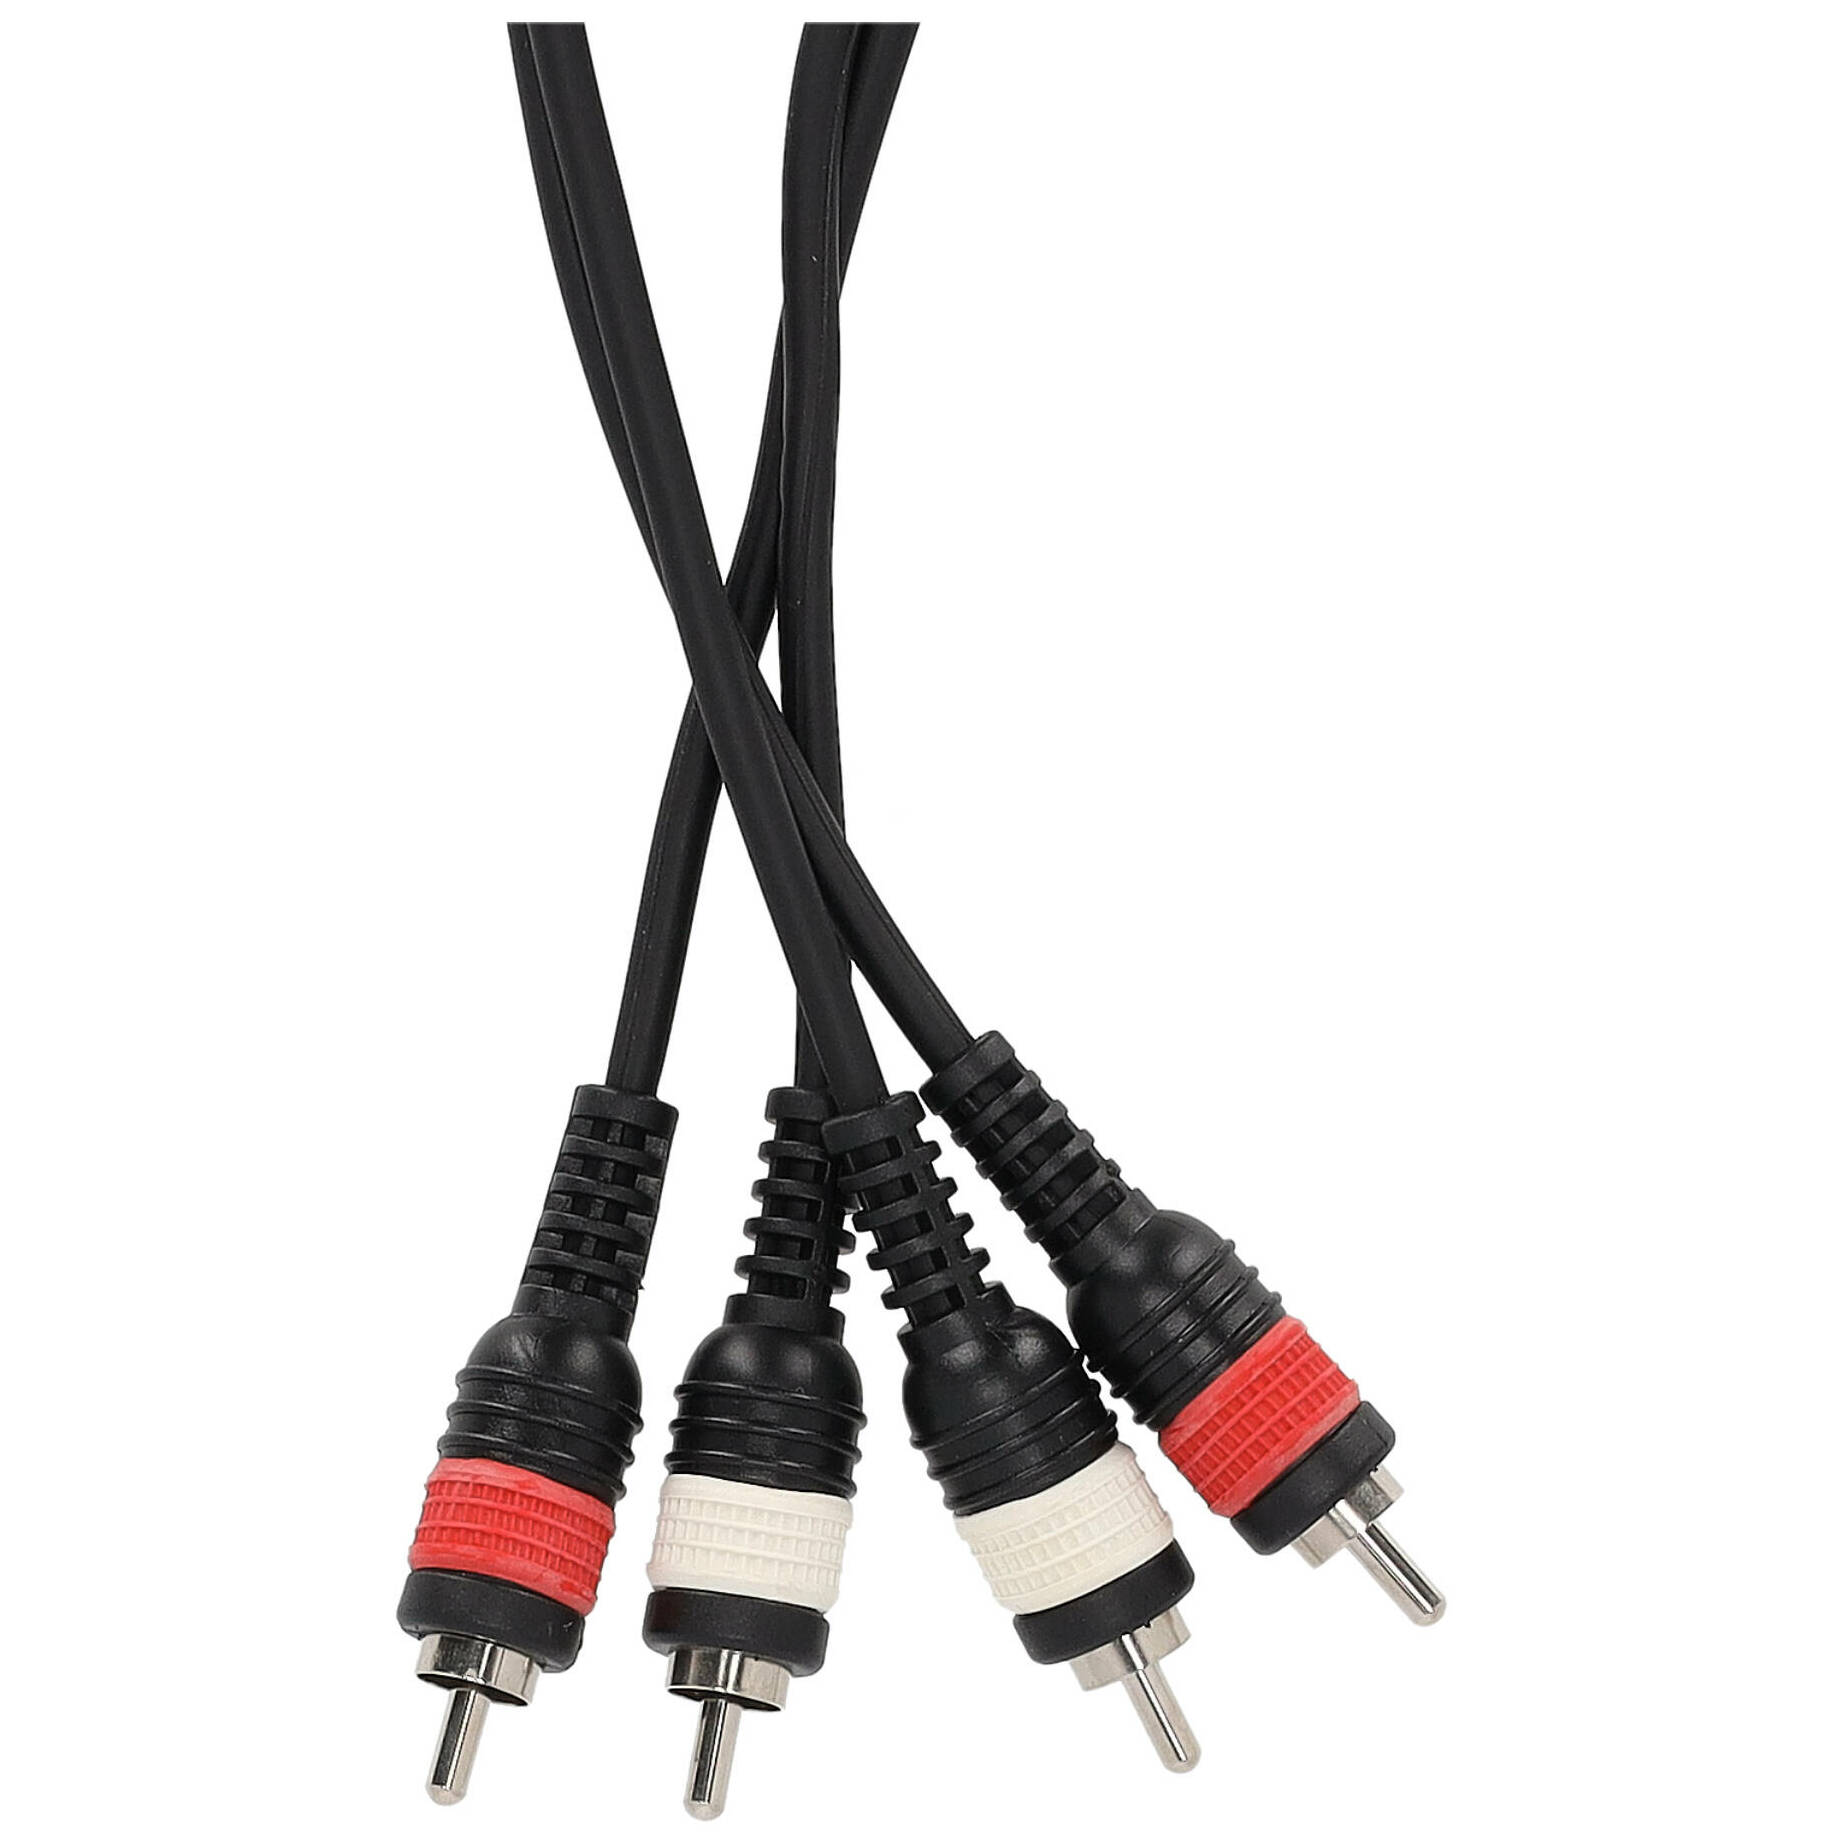 Sommer Cable BV-CICI-0600 SC-Onyx Basic 2 x Cinch Male - 2 x Cinch Male 6 Meter 2